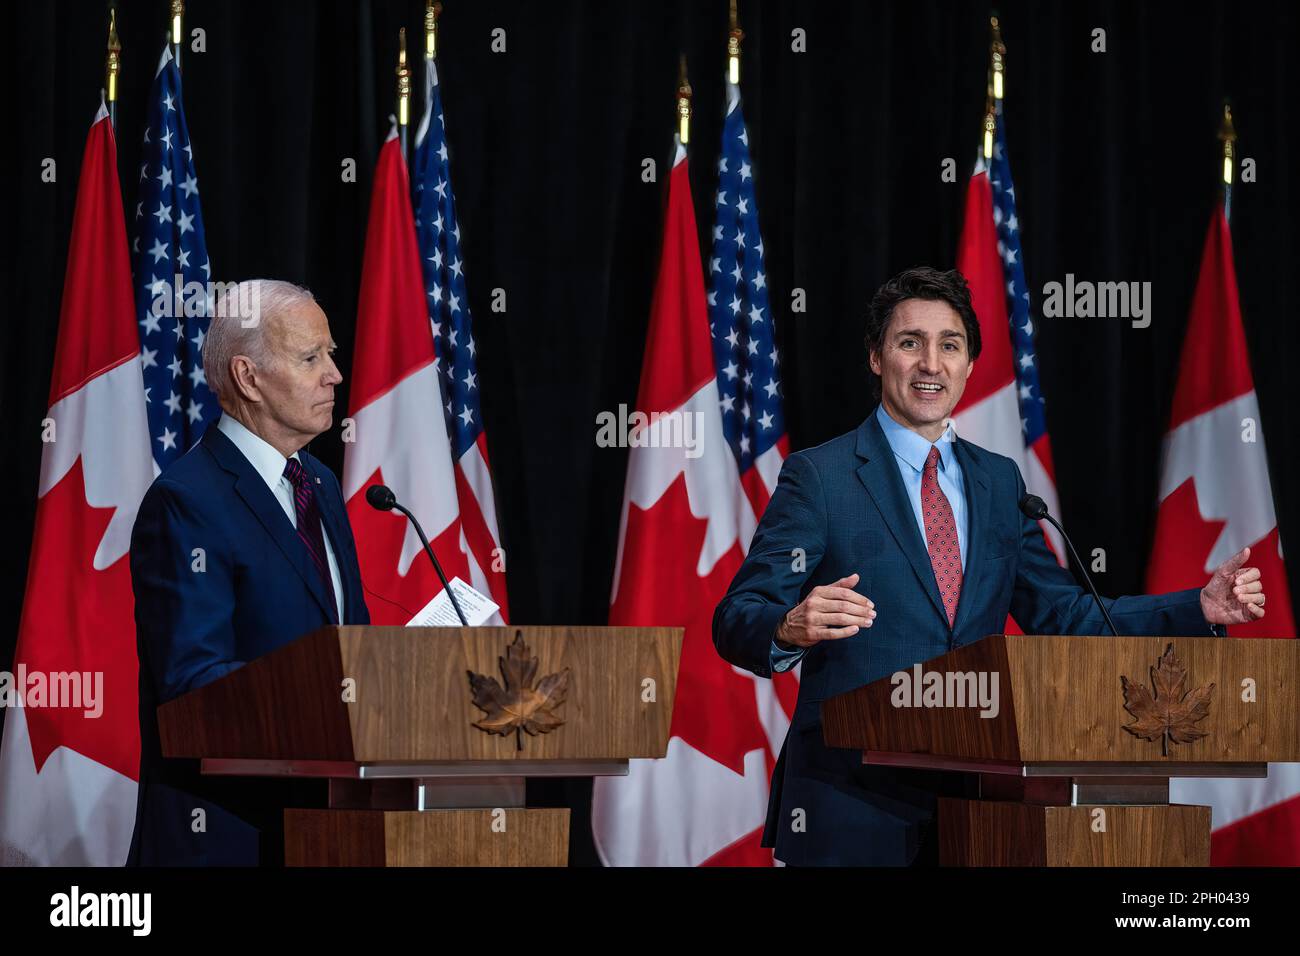 Ottawa, Canada. 24th Mar, 2023. Canadian Prime Minister Justin Trudeau speaks during a joint press conference with U.S. President Joe Biden at the Sir John A. Macdonald Building in Ottawa. This is the first official visit that the American president has made to Canada since becoming president. Though visits between elected presidents and the allied country typically take place sooner, Biden's inaugural visit to the northern neighbor was delayed due to COVID-19 travel restrictions. Credit: SOPA Images Limited/Alamy Live News Stock Photo